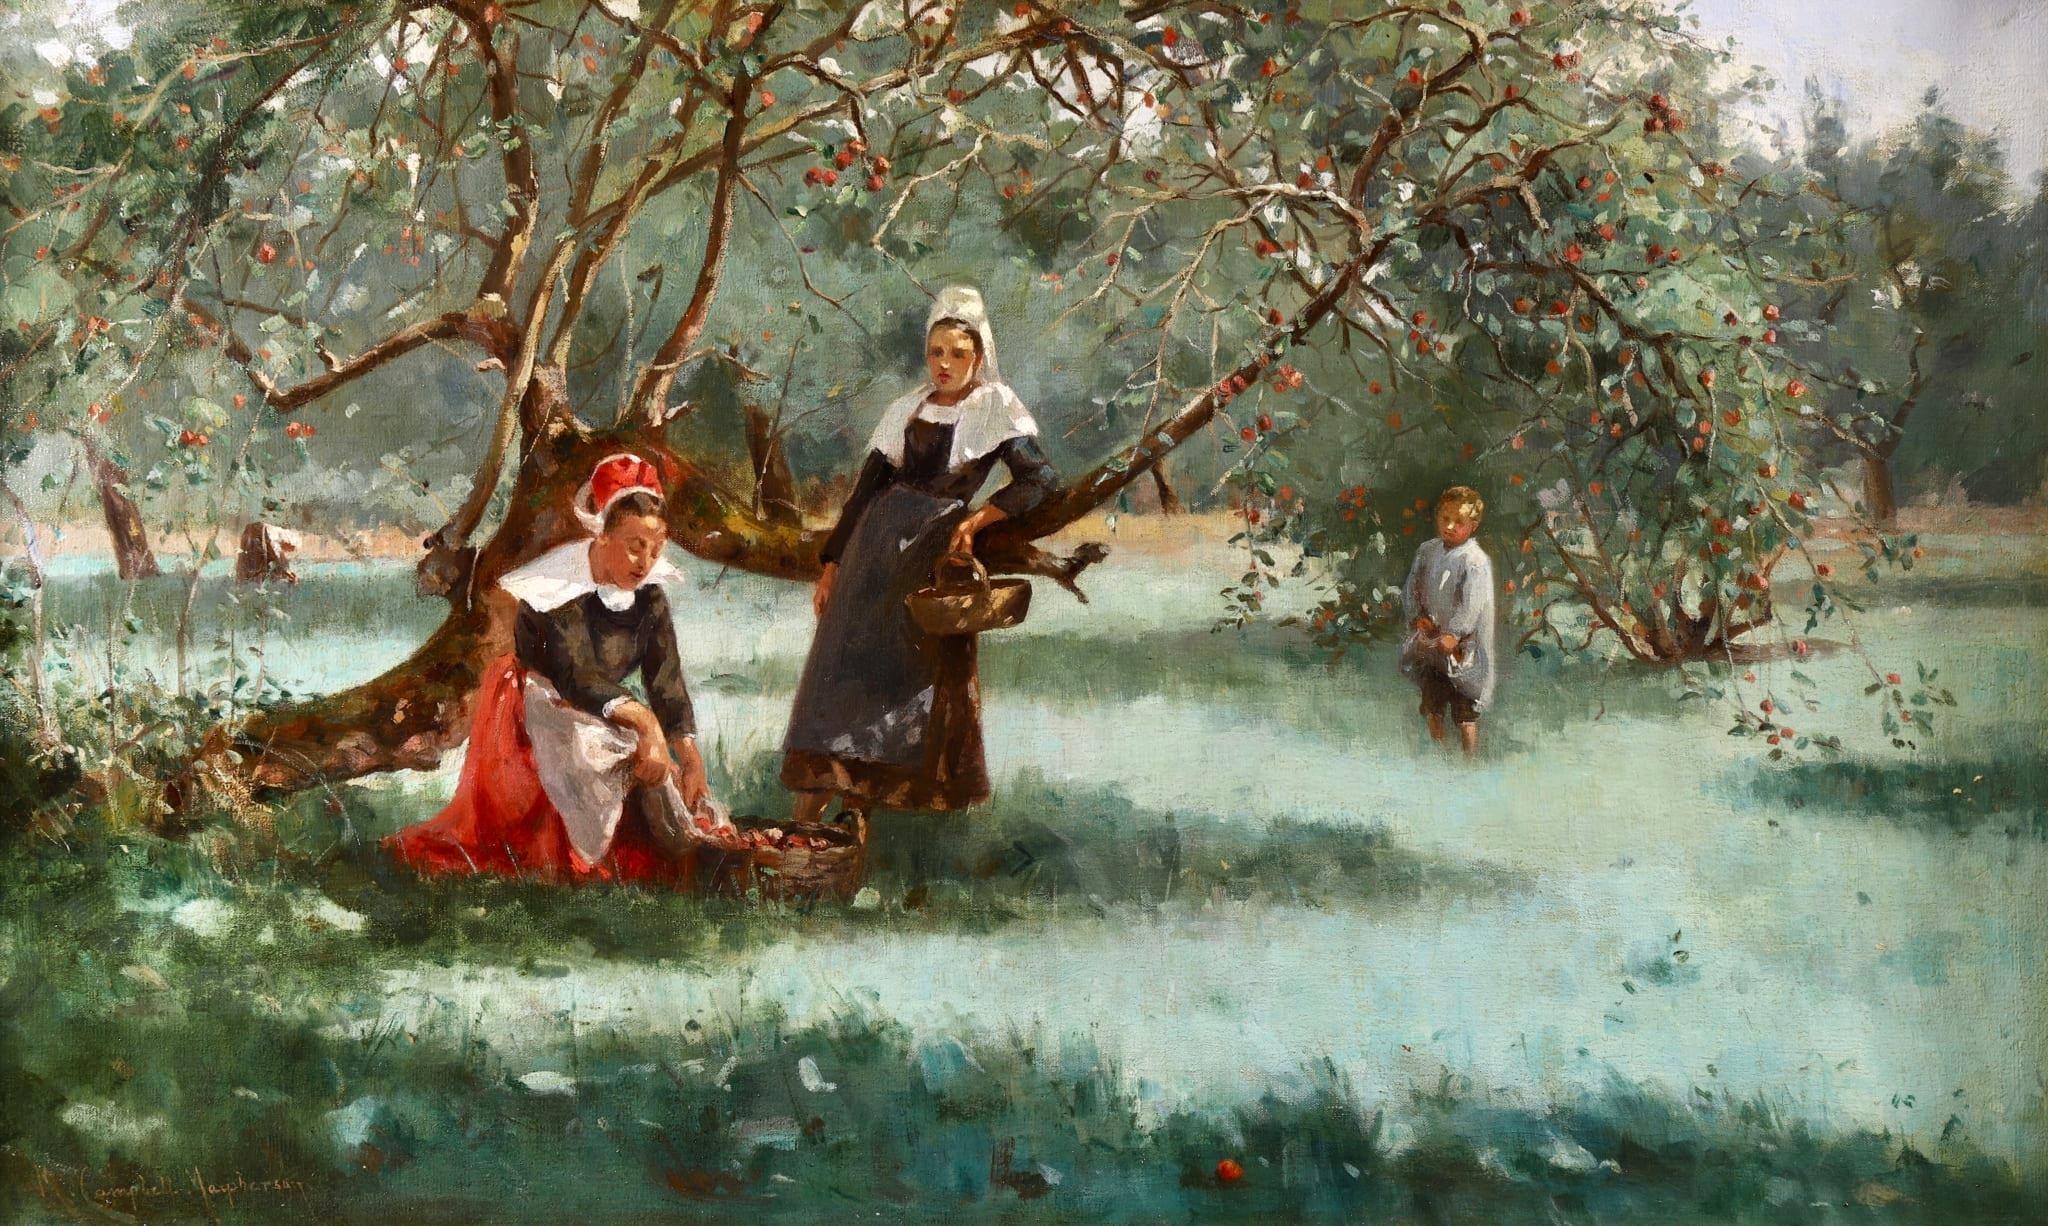 Margaret Campbell MacPherson Figurative Painting - Collecting Apples - Impressionist Oil, Figures in Landscape by M C Macpherson 